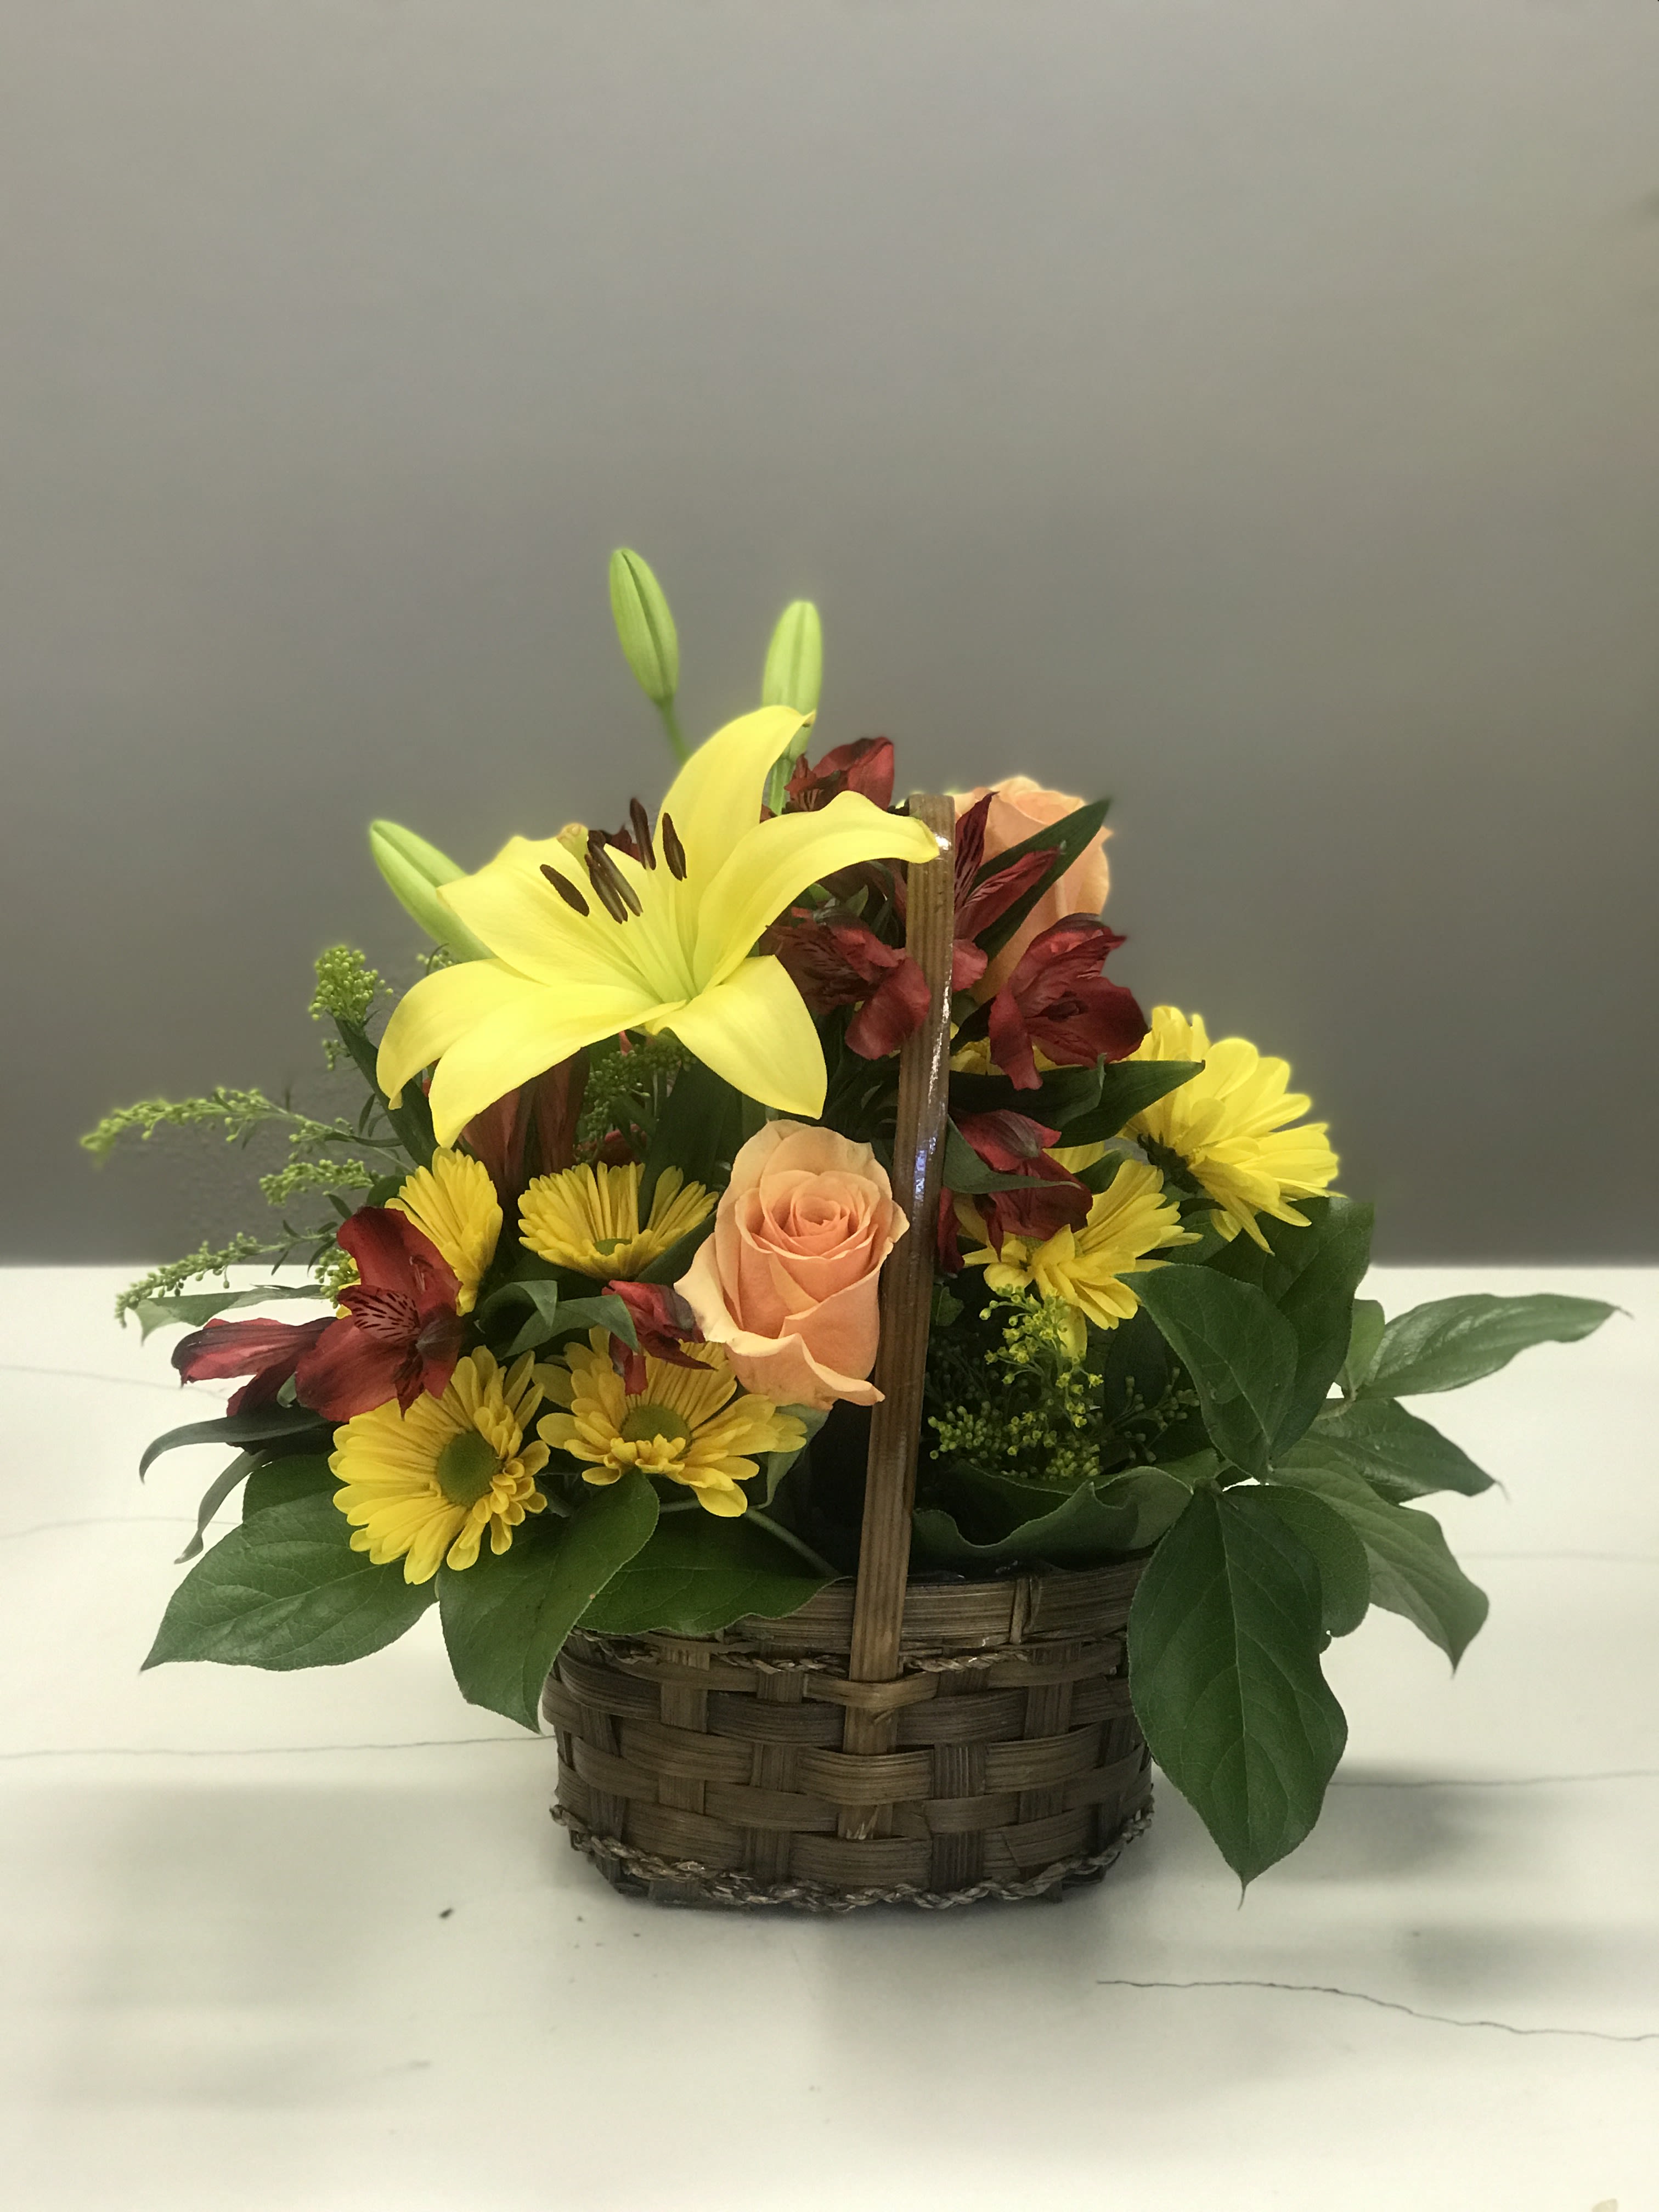 Sunset Harvest - Full of autumnal colors, this little basket is the perfect gift to start of the season with a quick reminder that seasons pass but love remains.